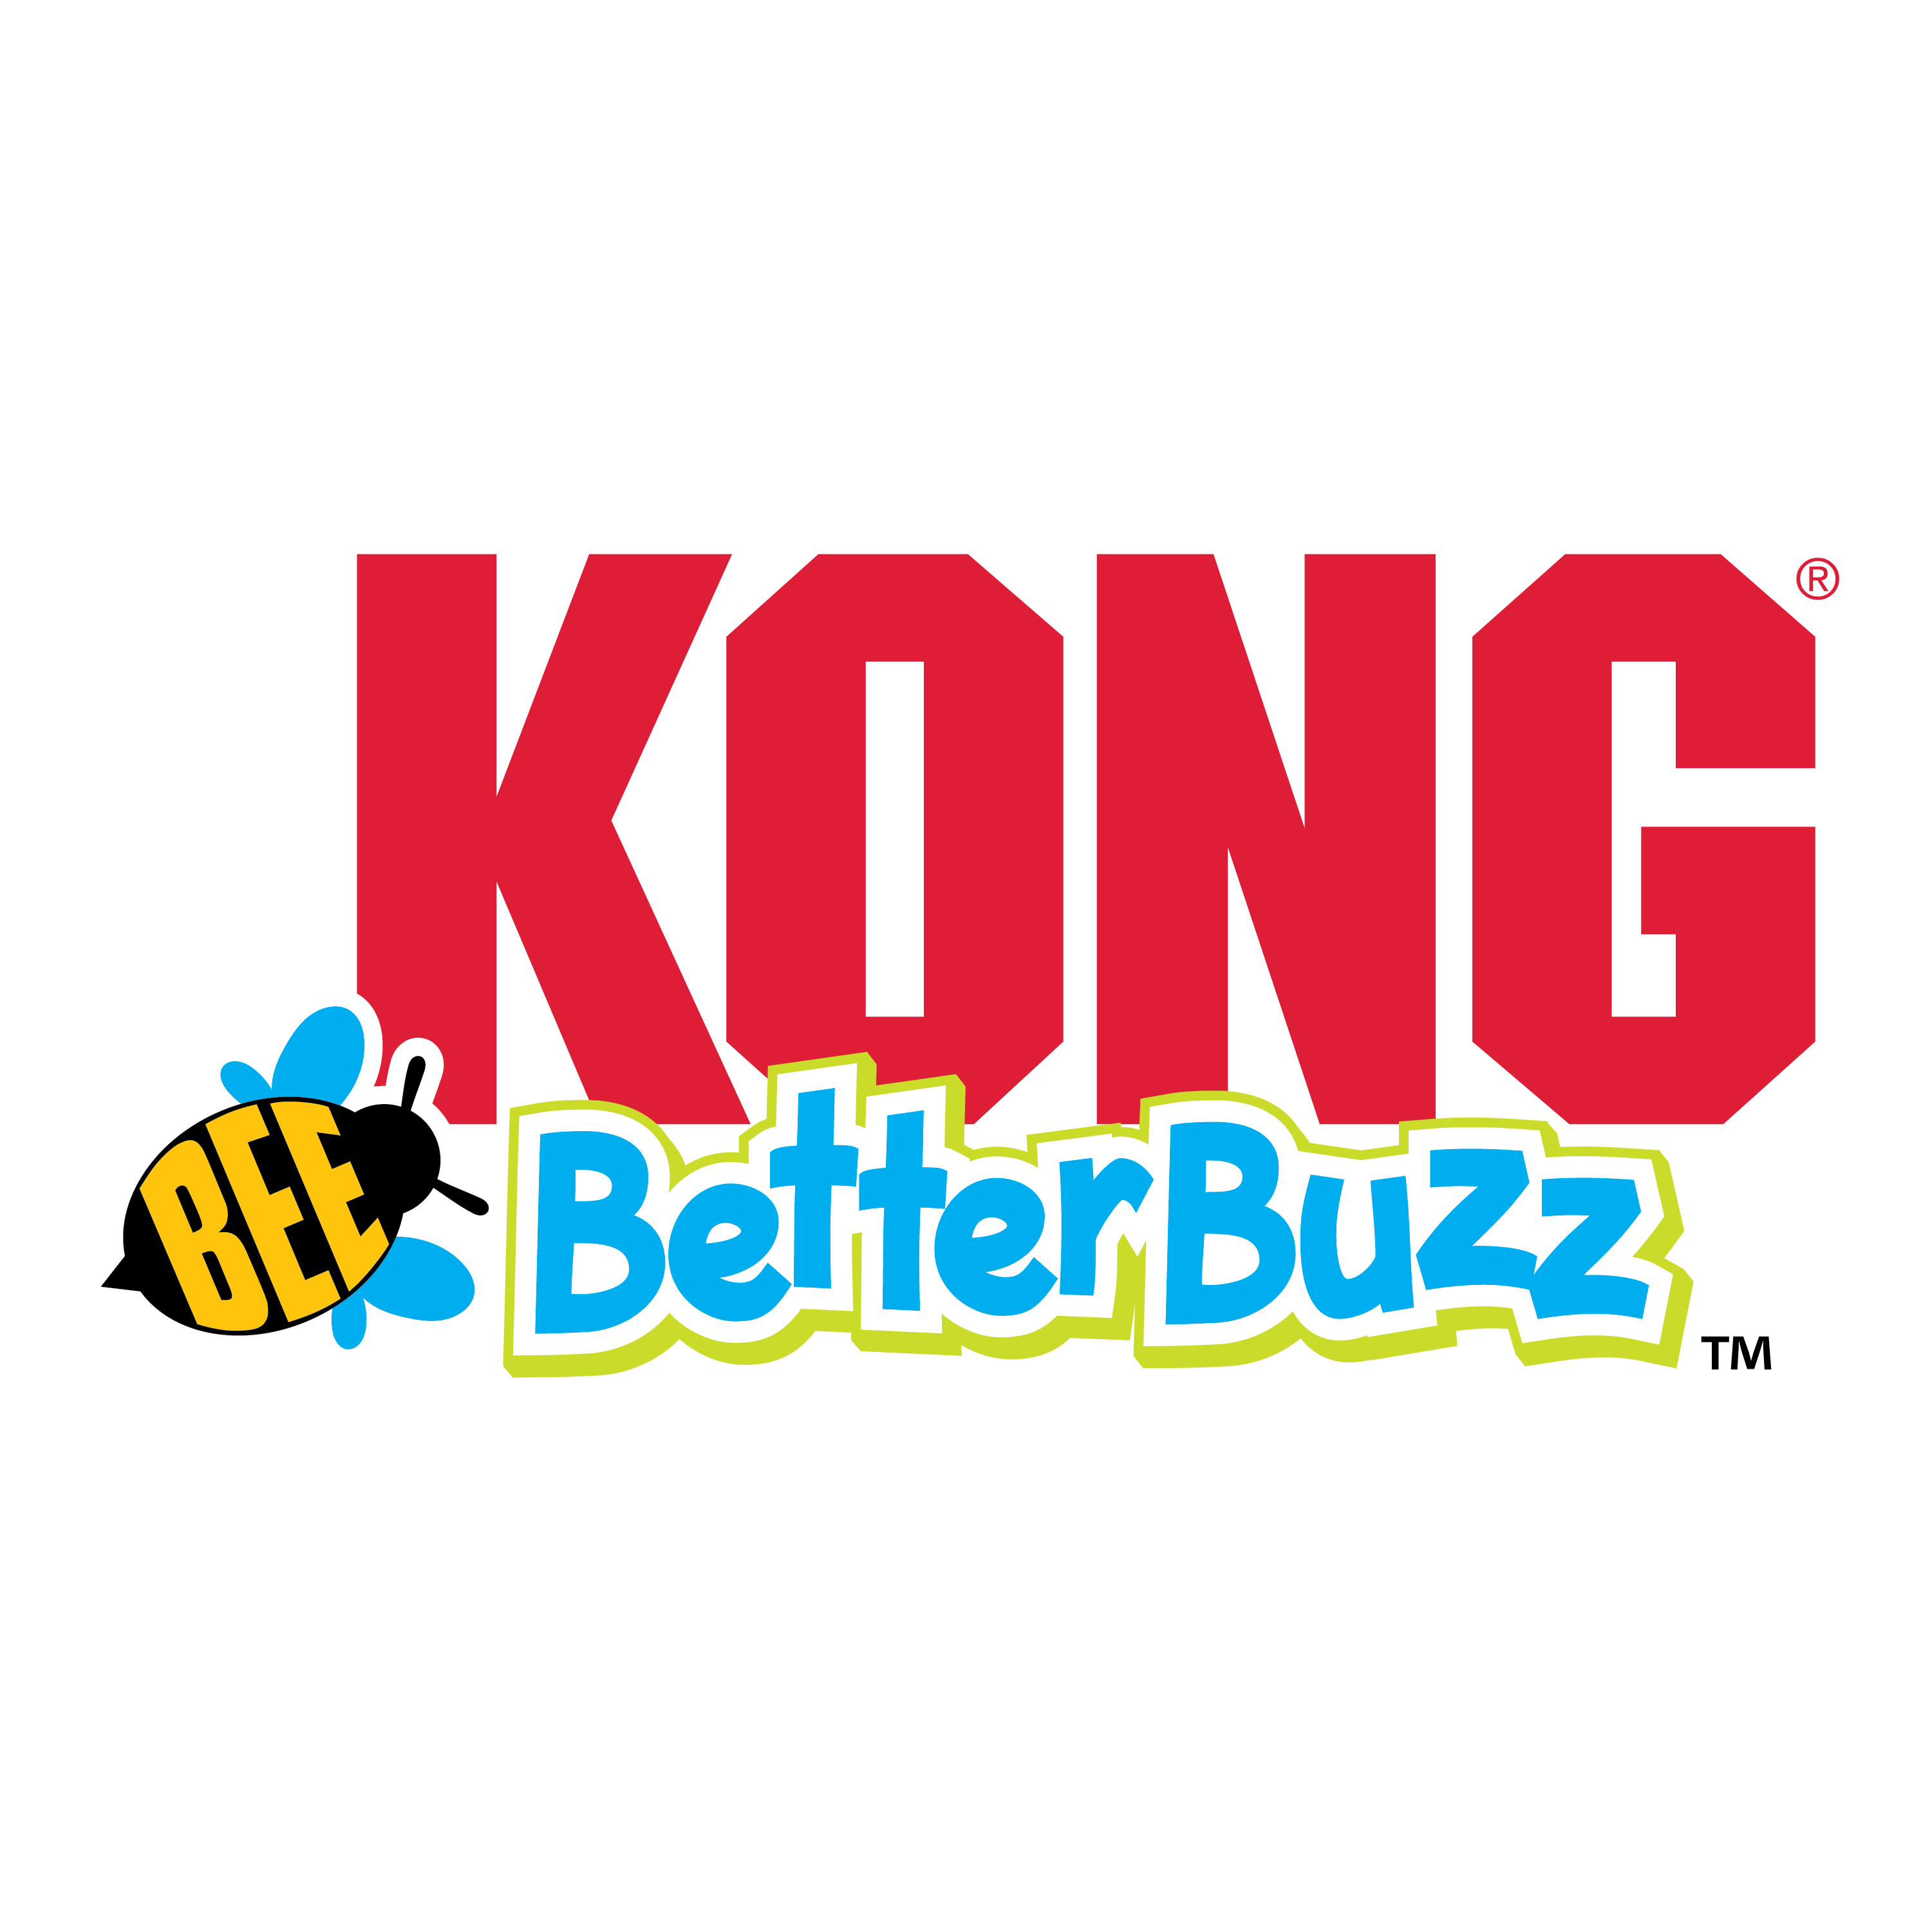 Better Buzz Bee alt1 product image